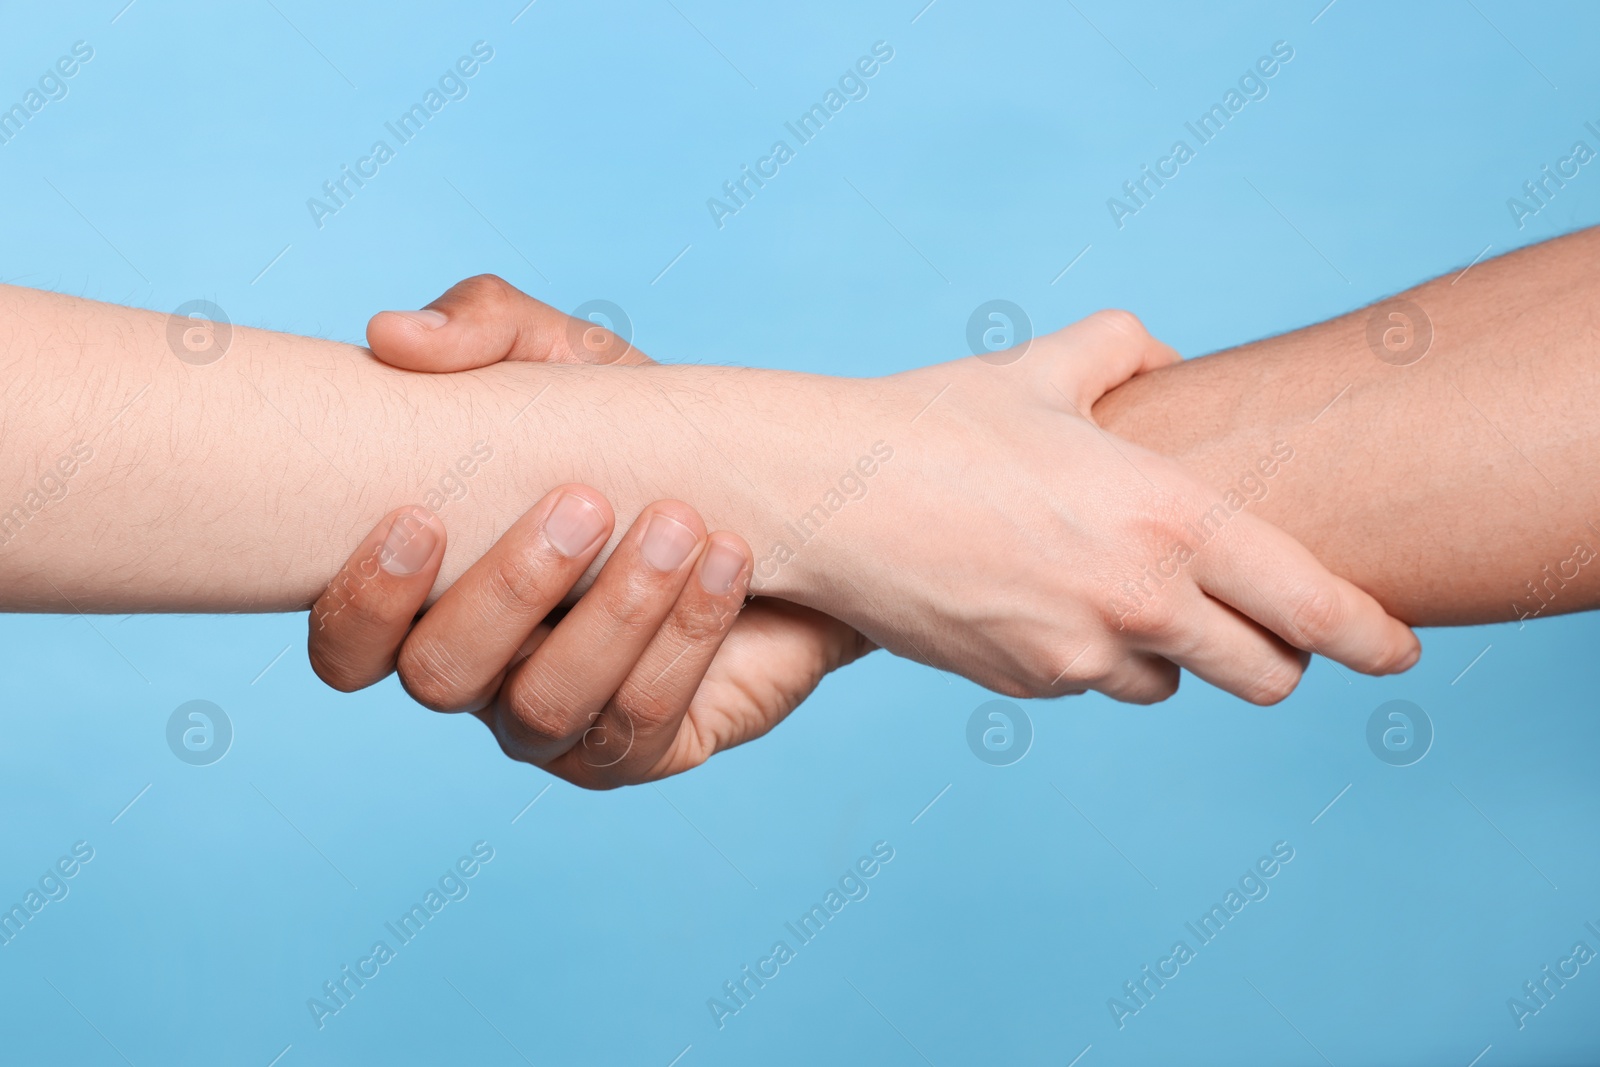 Photo of International relationships. People holding hands on light blue background, closeup